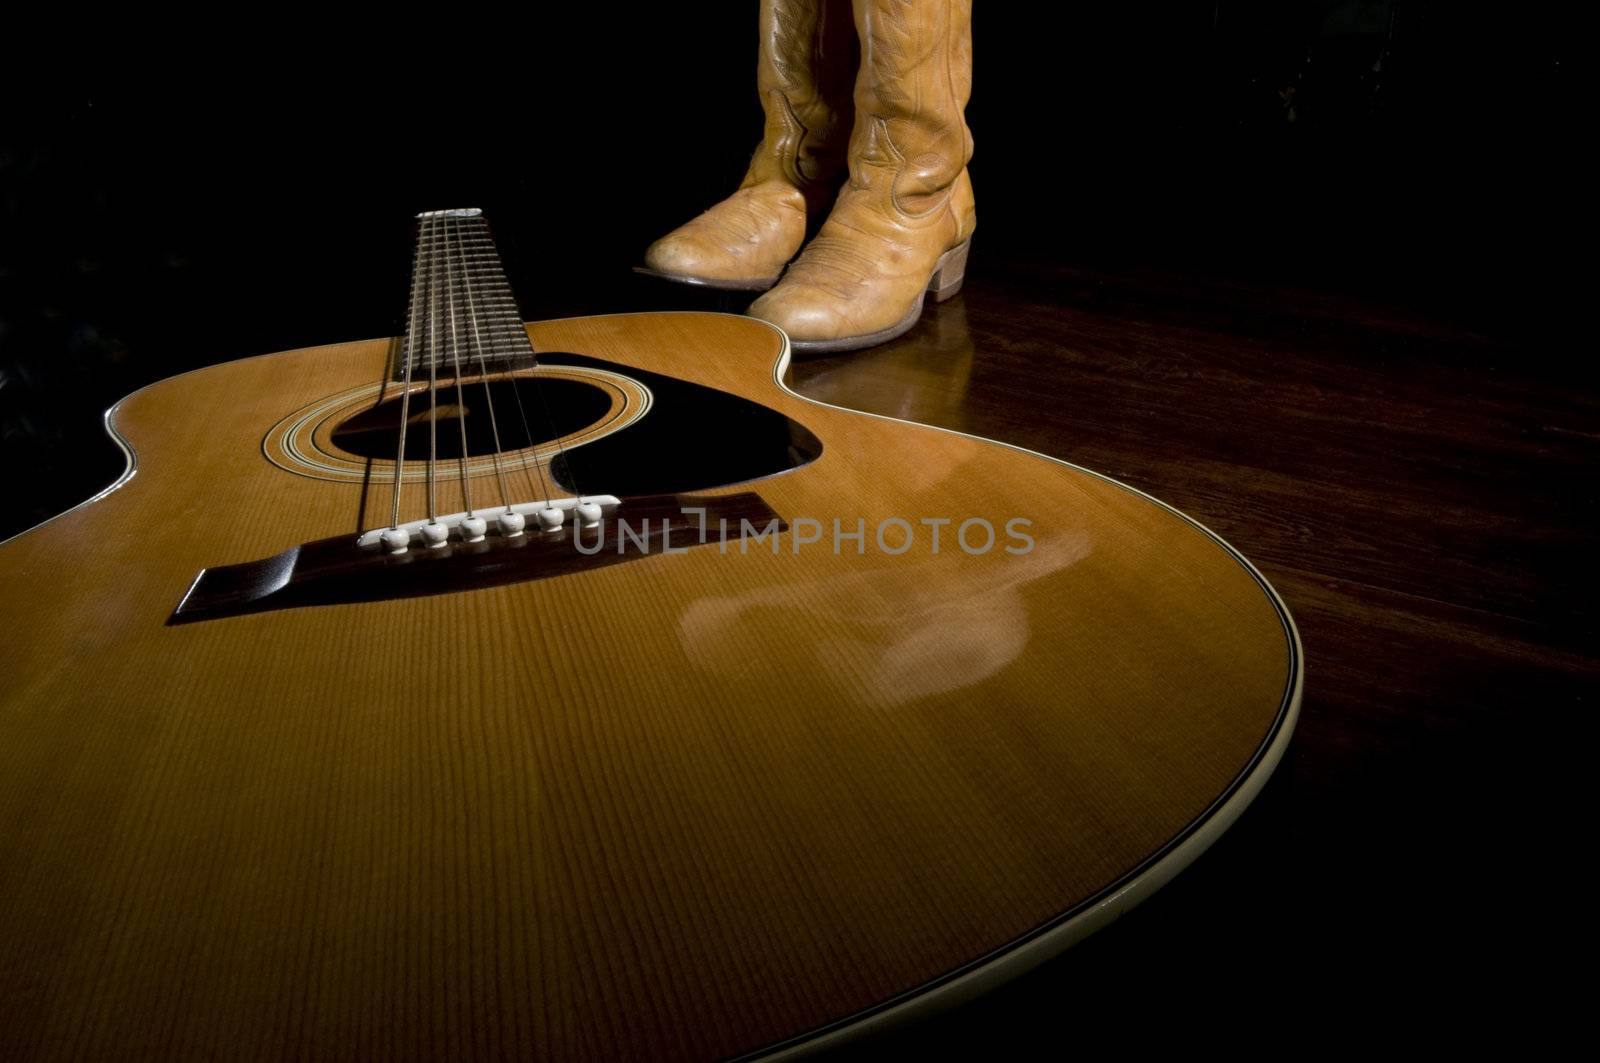 Selective focus on the guitar in the foreground with cowboy boots in the background